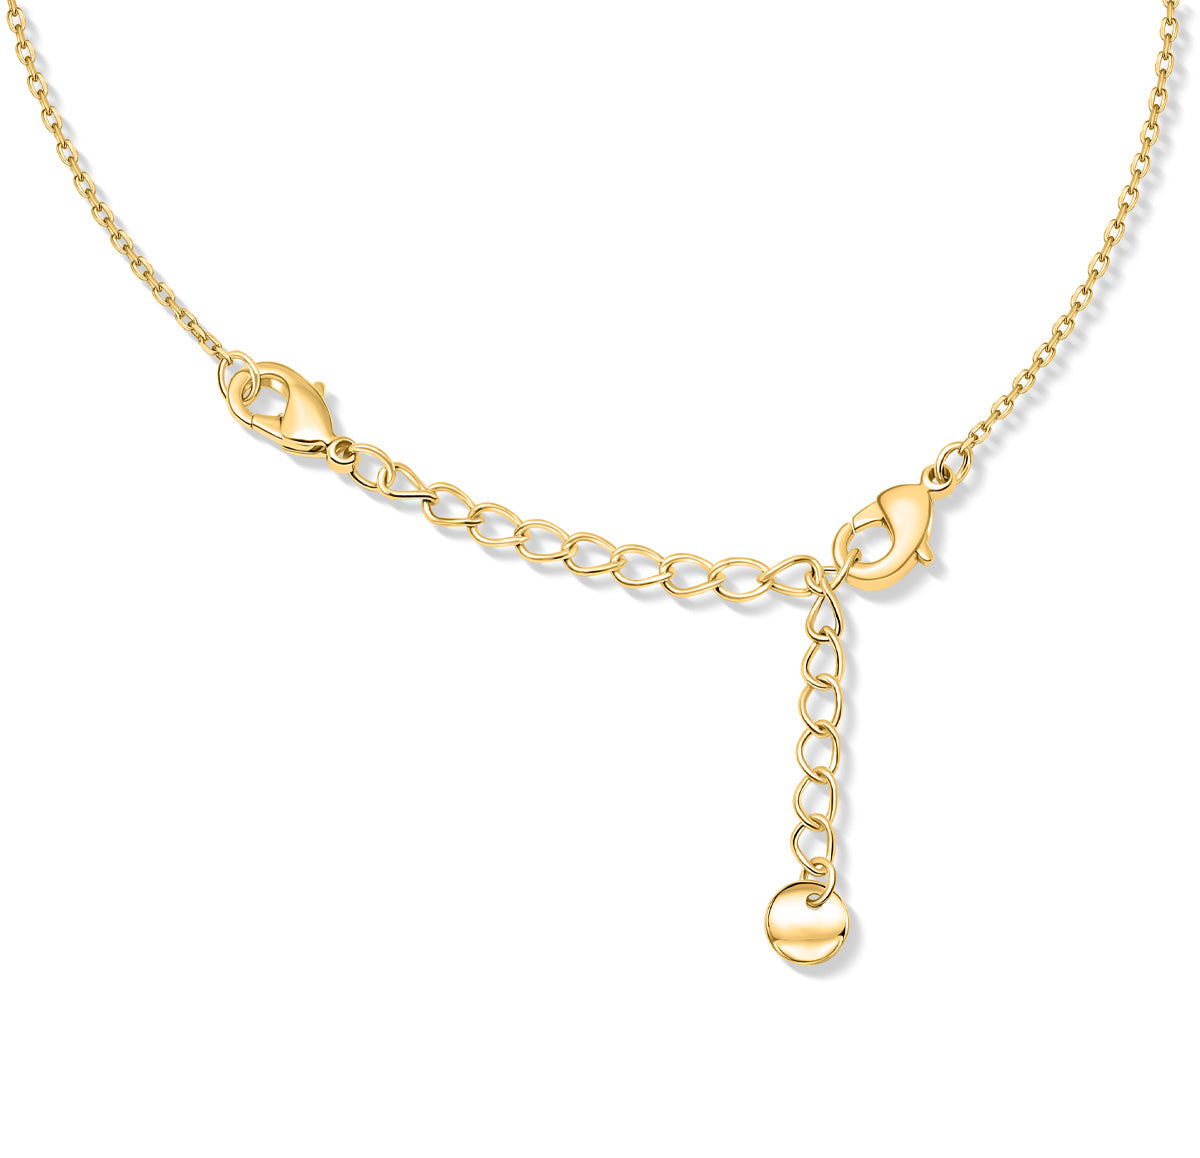 Dainty gold necklace extender chain